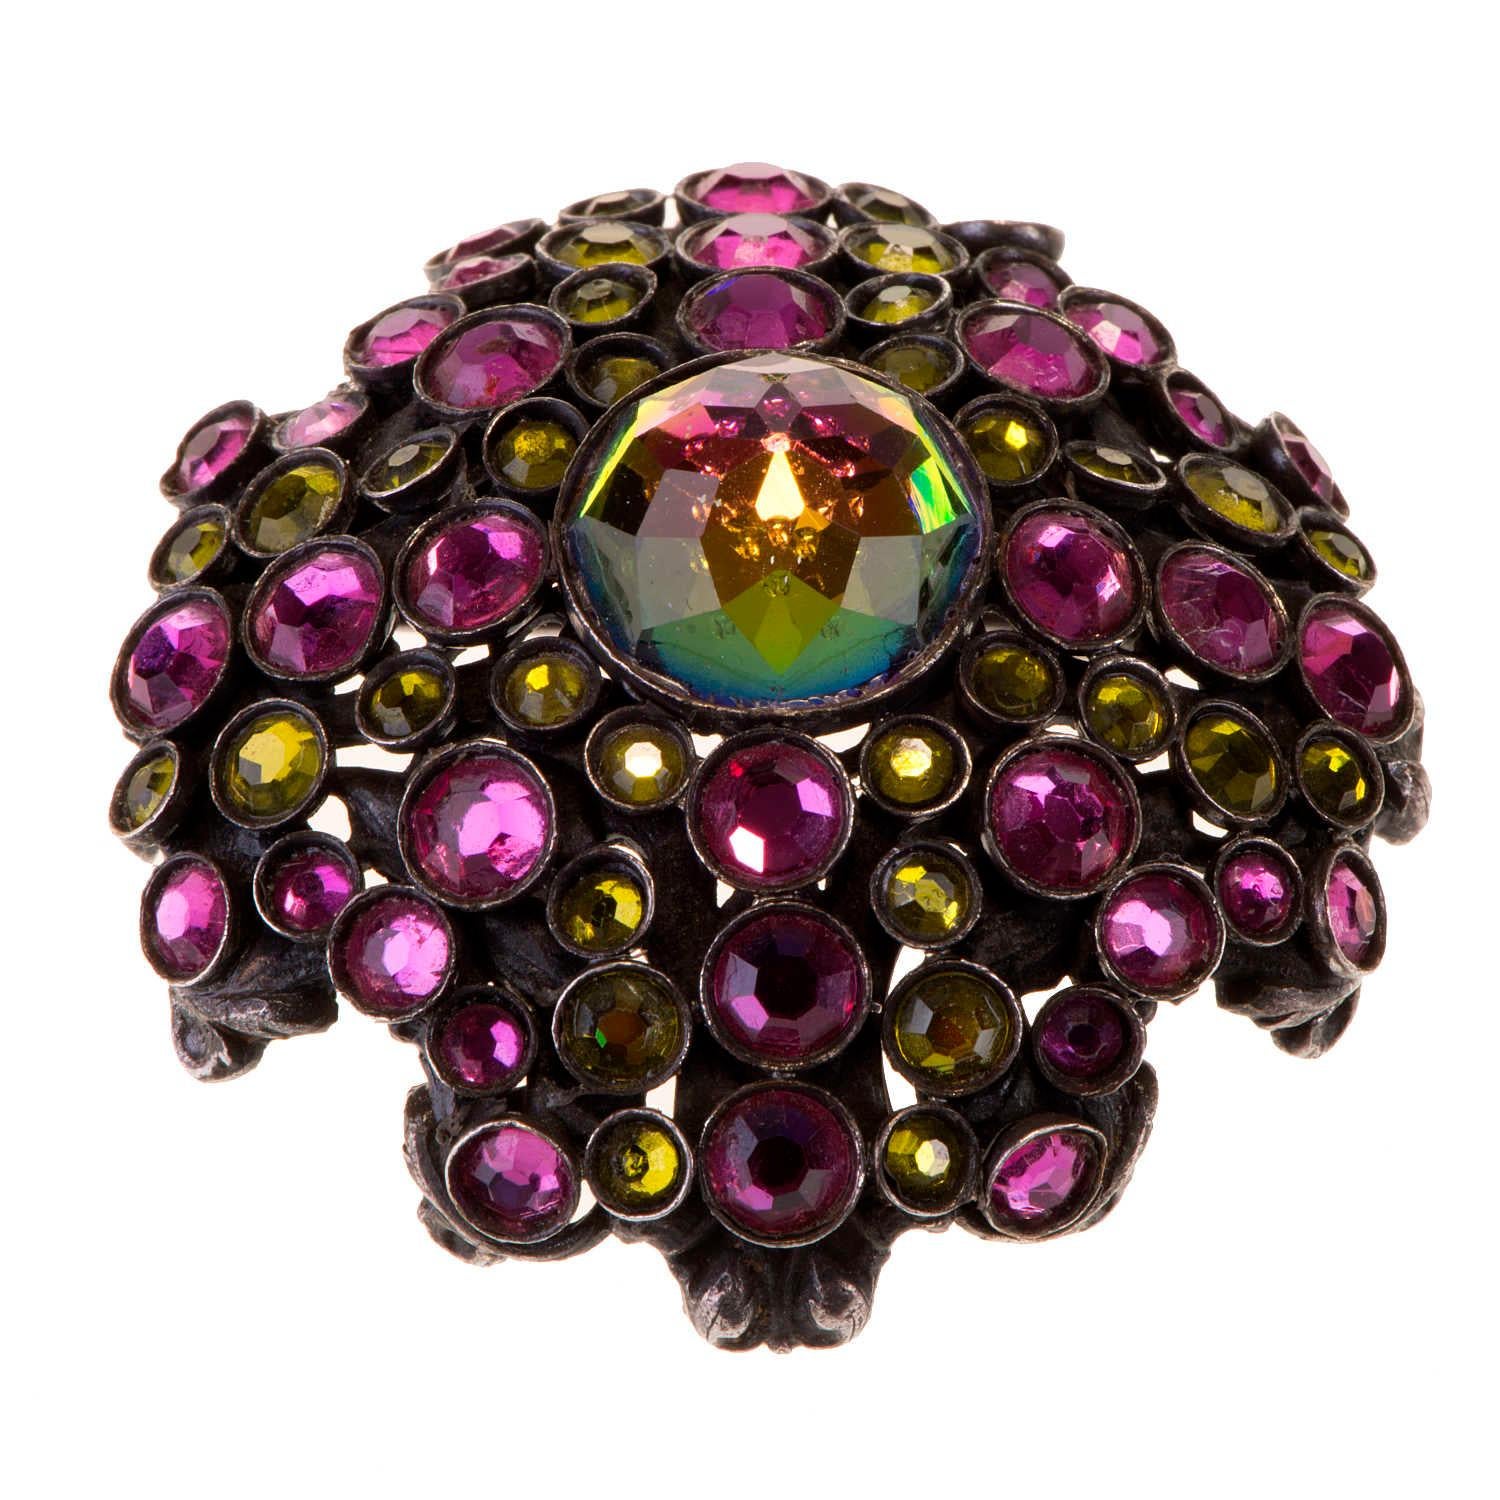 A Very Rare Vintage Brooch by Henry Bogoff of Chicago